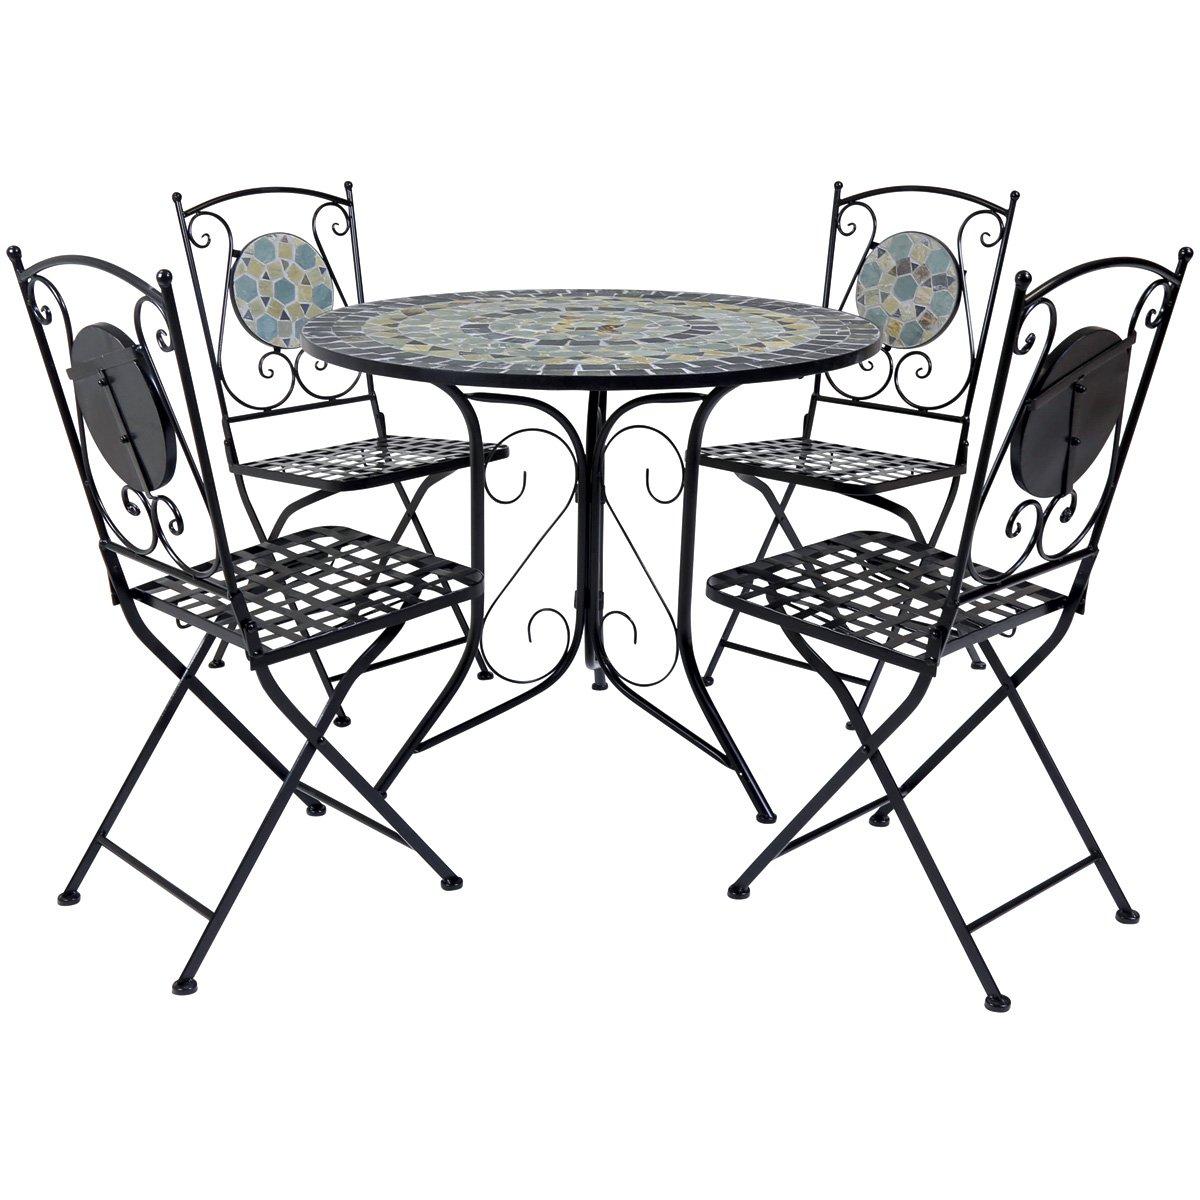 Garden Blue Mosaic 5 Piece Dining Set With Folding Chairs Patio